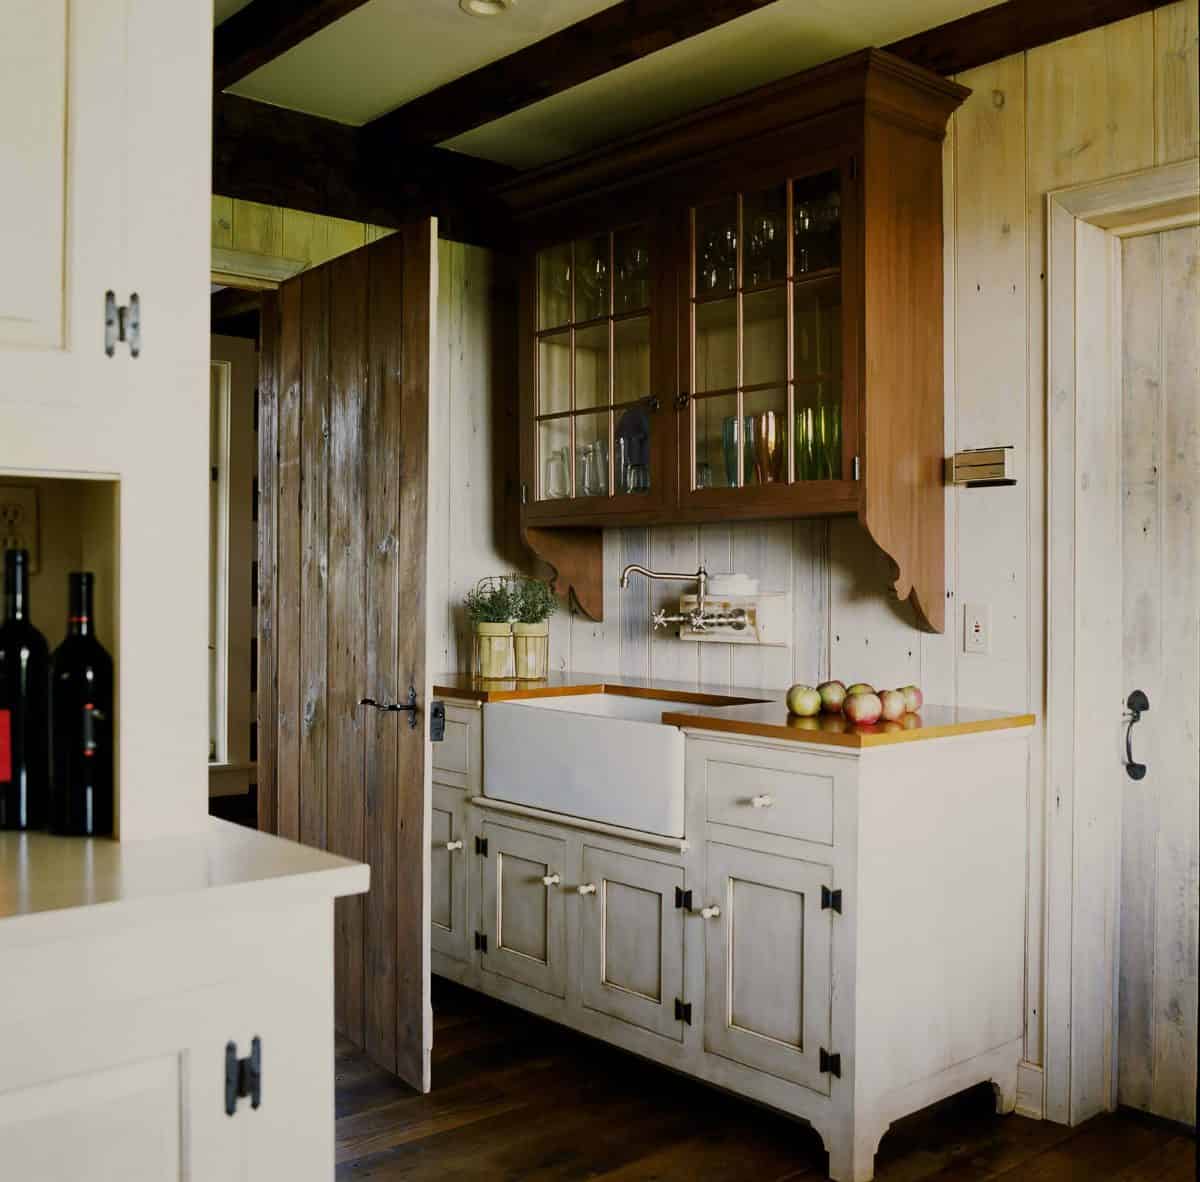 23 Best Ideas of Rustic Kitchen Cabinet You'll Want to Copy